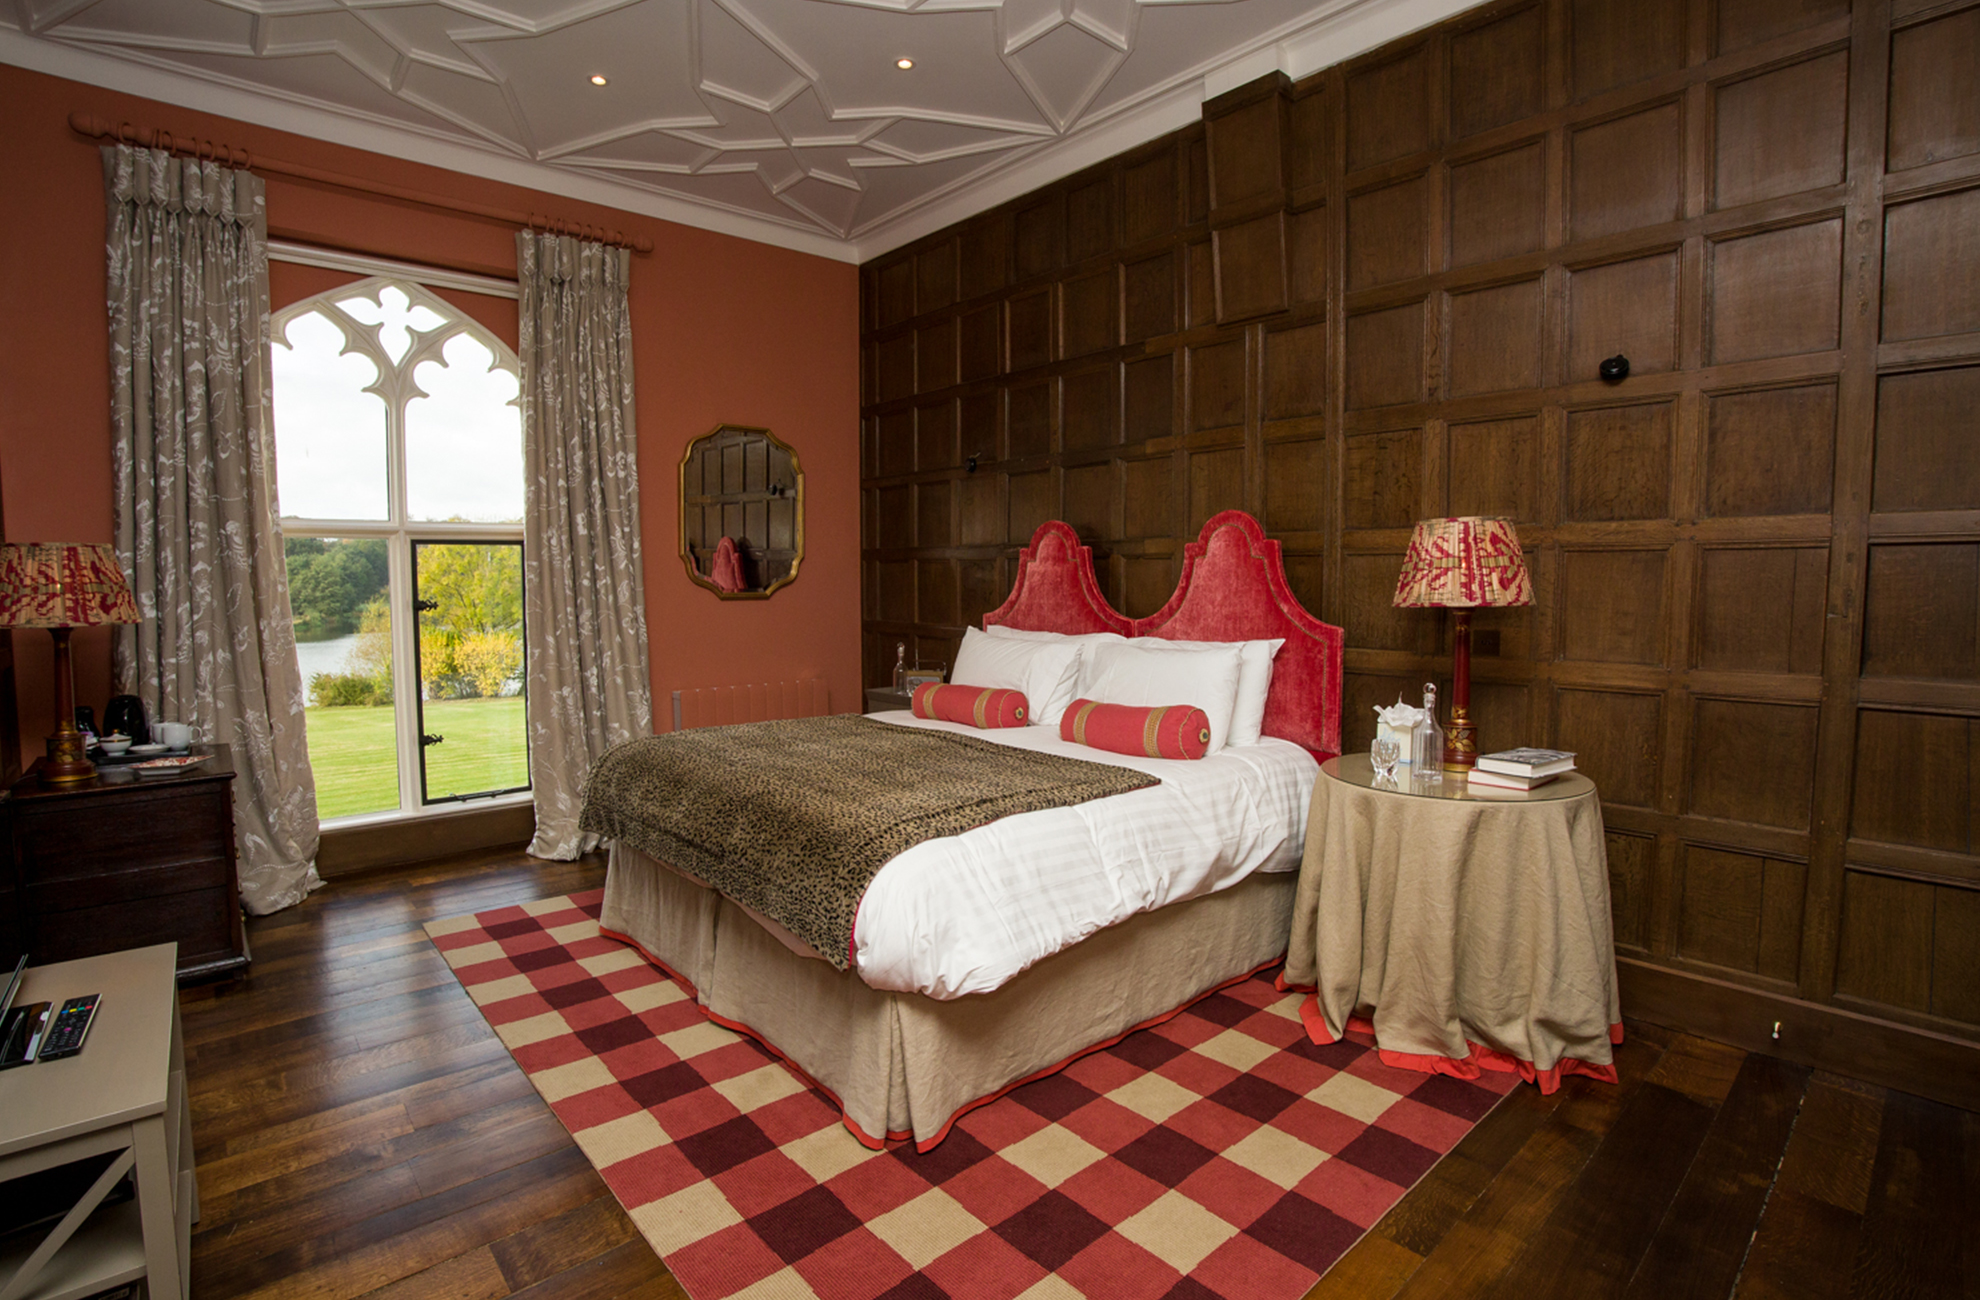 Bhurtpore Room luxurious accommodation at Combermere Abbey